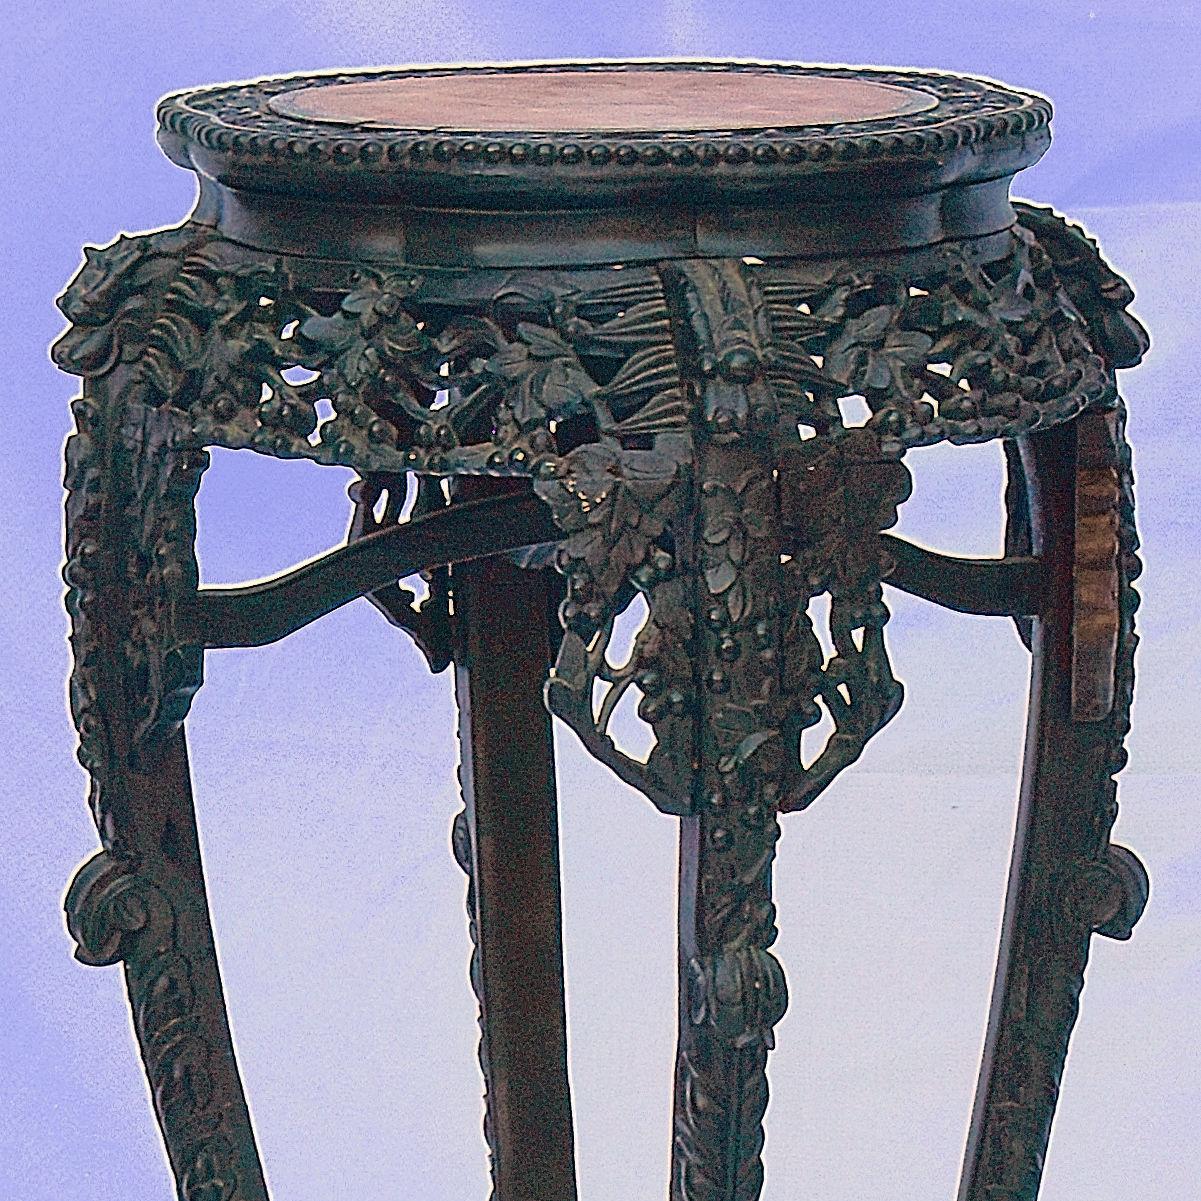 Original late Qing Dynasty highly detailed hand-carved dragon display stand with a marble top. The timber patina is exactly as you would expect for its late 19th century age with hand-carved details and claw feet.

bkx1
 